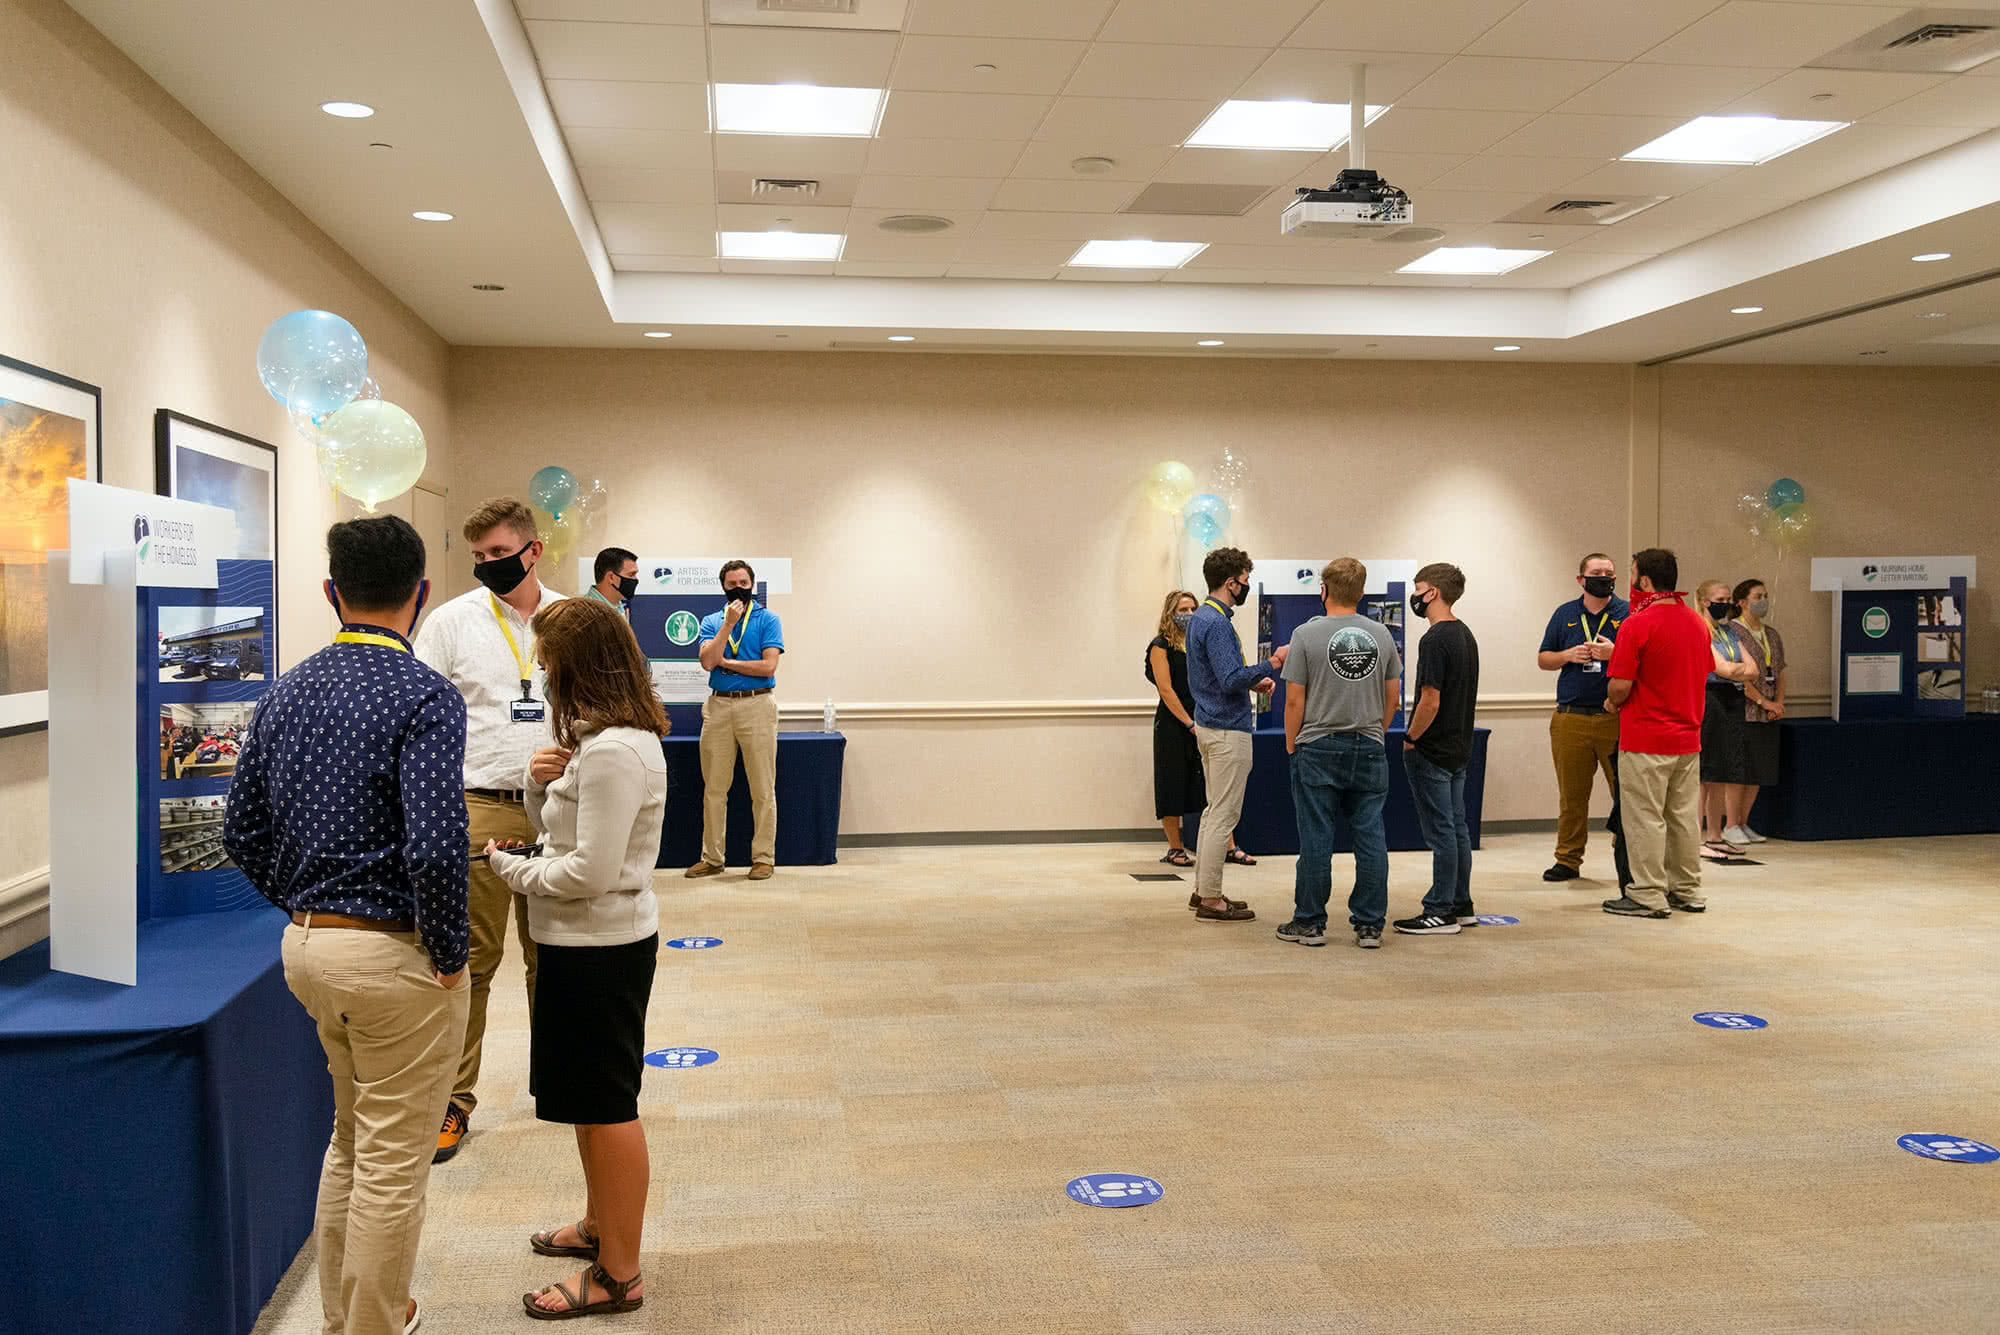 The Christian Service Expo took place over several nights and in the Commons Florida Room